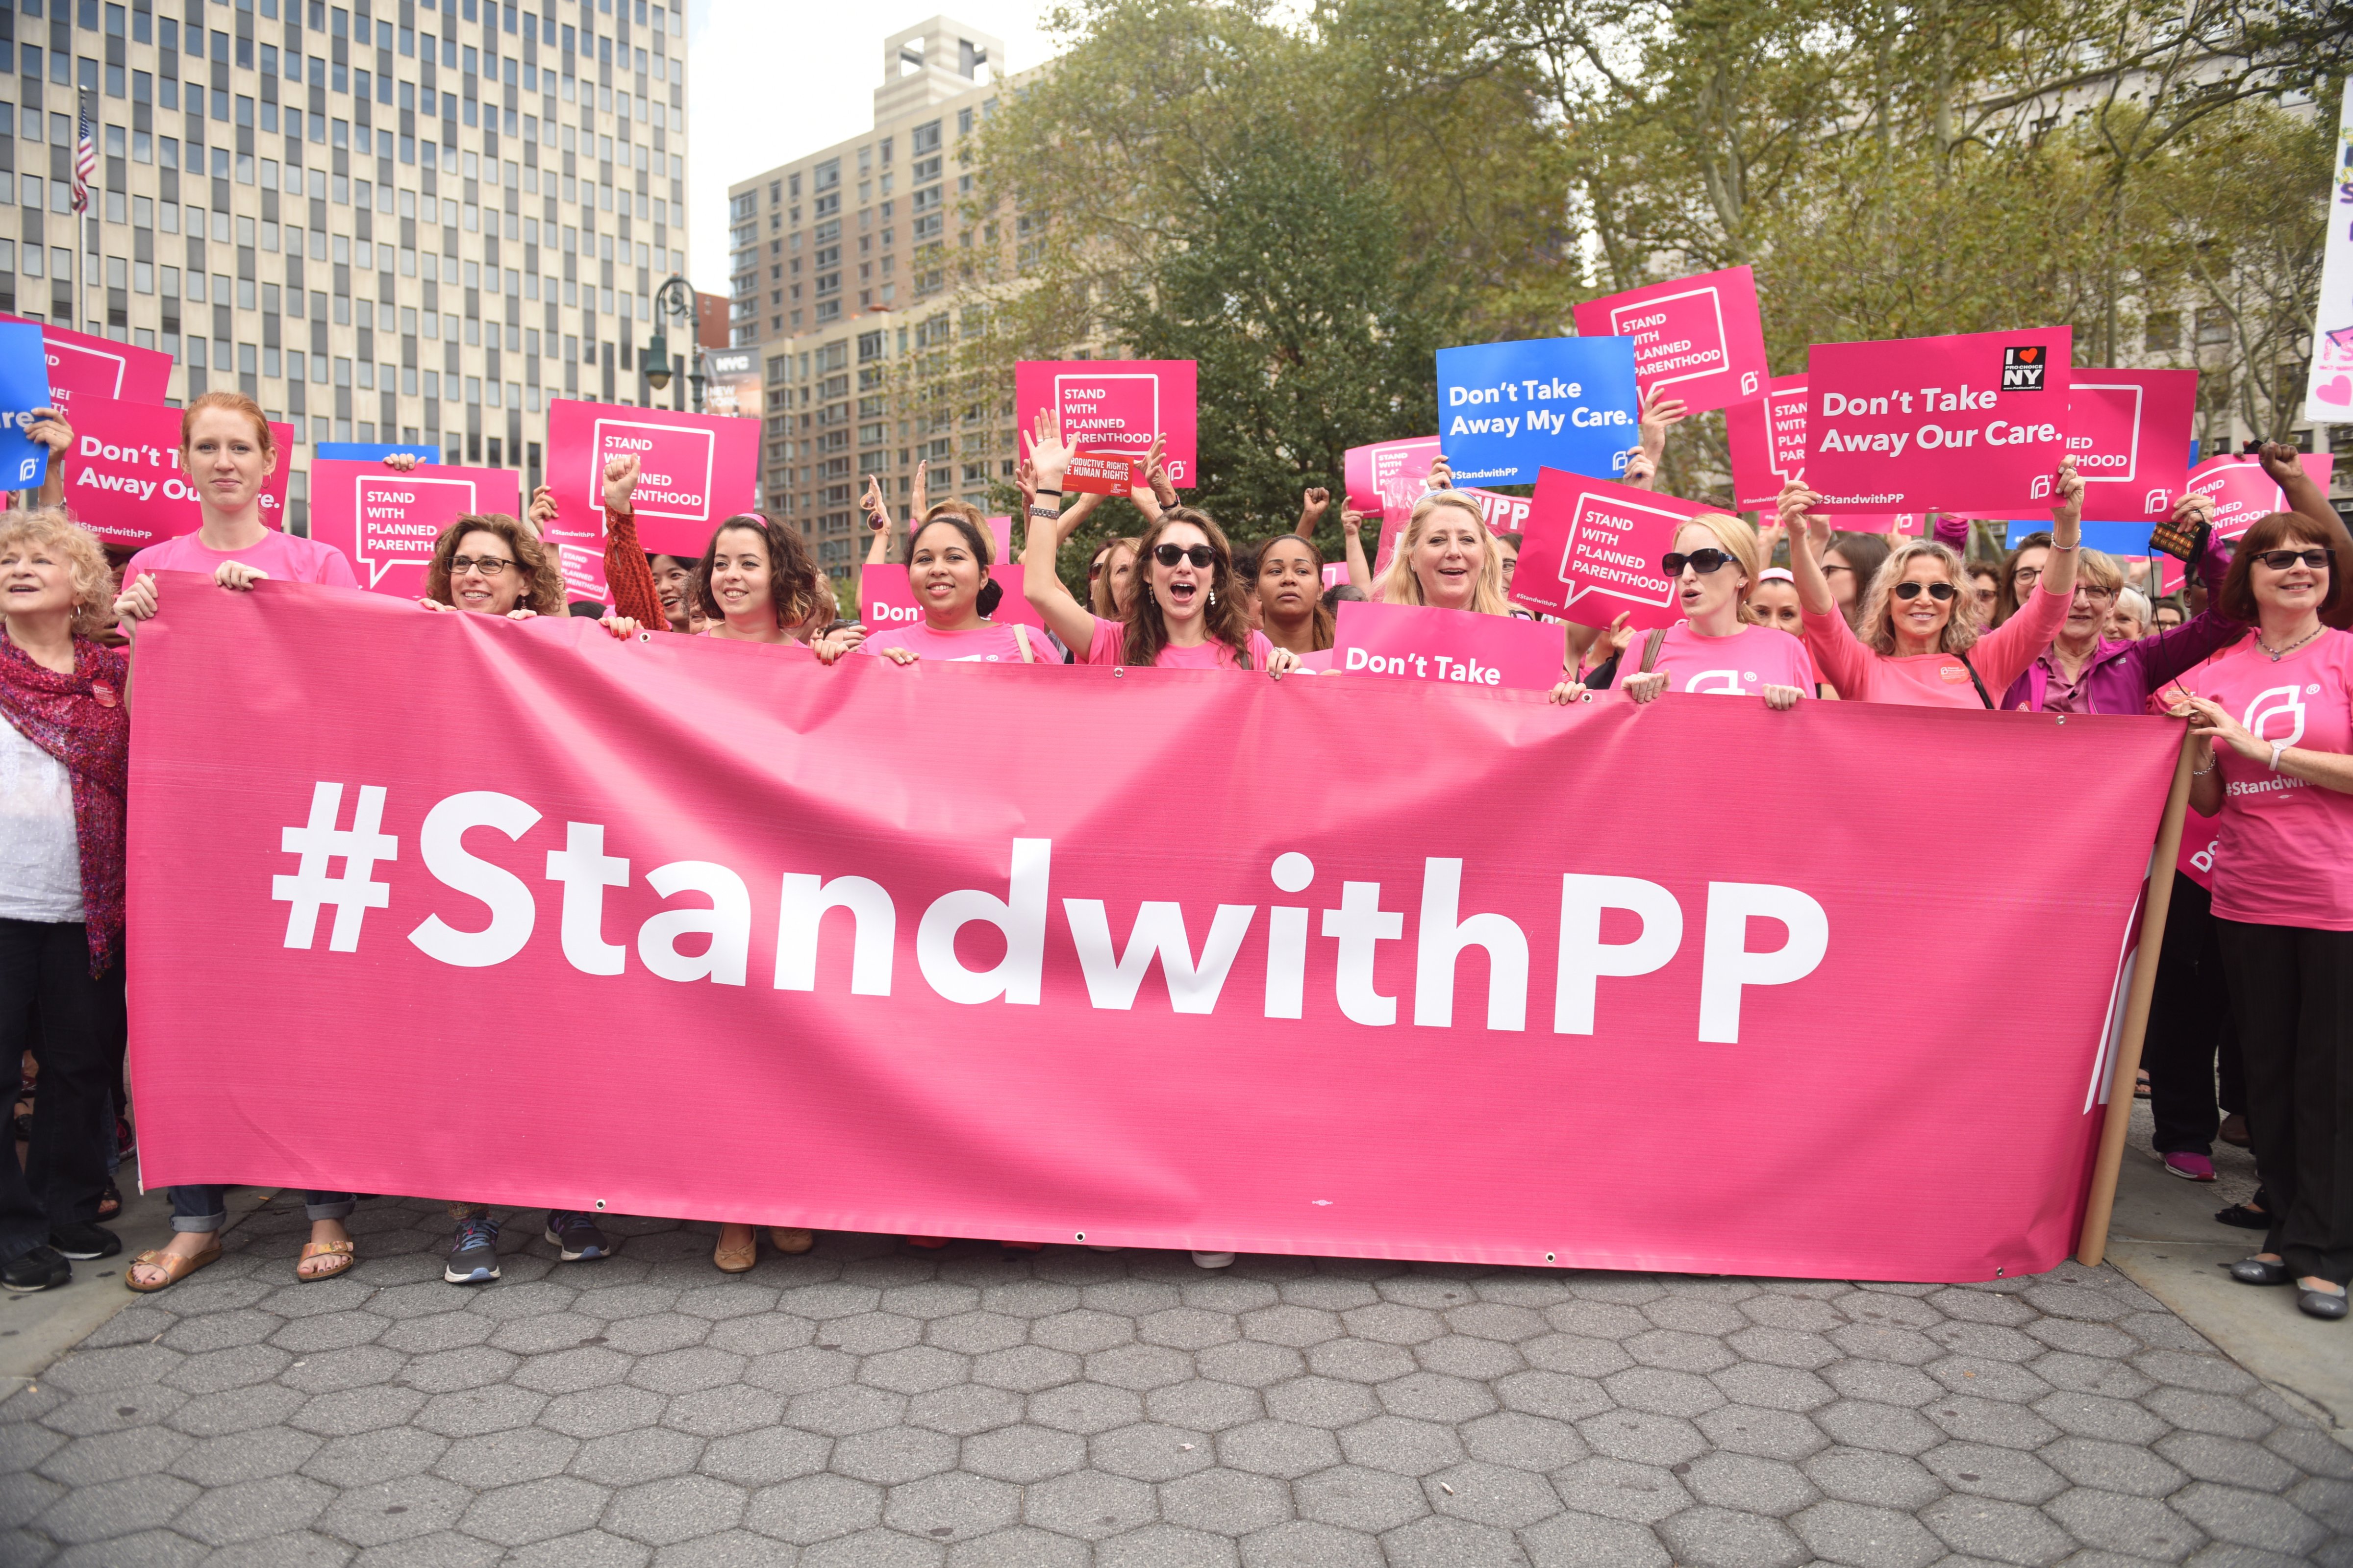 MANHATTAN, NEW YORK CITY, NEW YORK, UNITED STATES - 2015/09/29: Activists hold Planned Parenthood banner in Foley Square. Activists and directors of Planned Parenthood, NYC, gathered in Foley Square along NYC first lady Chirlane McCray and elected representatives to demonstrate support for the organization. (Photo by Andy Katz/Pacific Press/LightRocket via Getty Images) (Pacific Press—LightRocket via Getty Images)